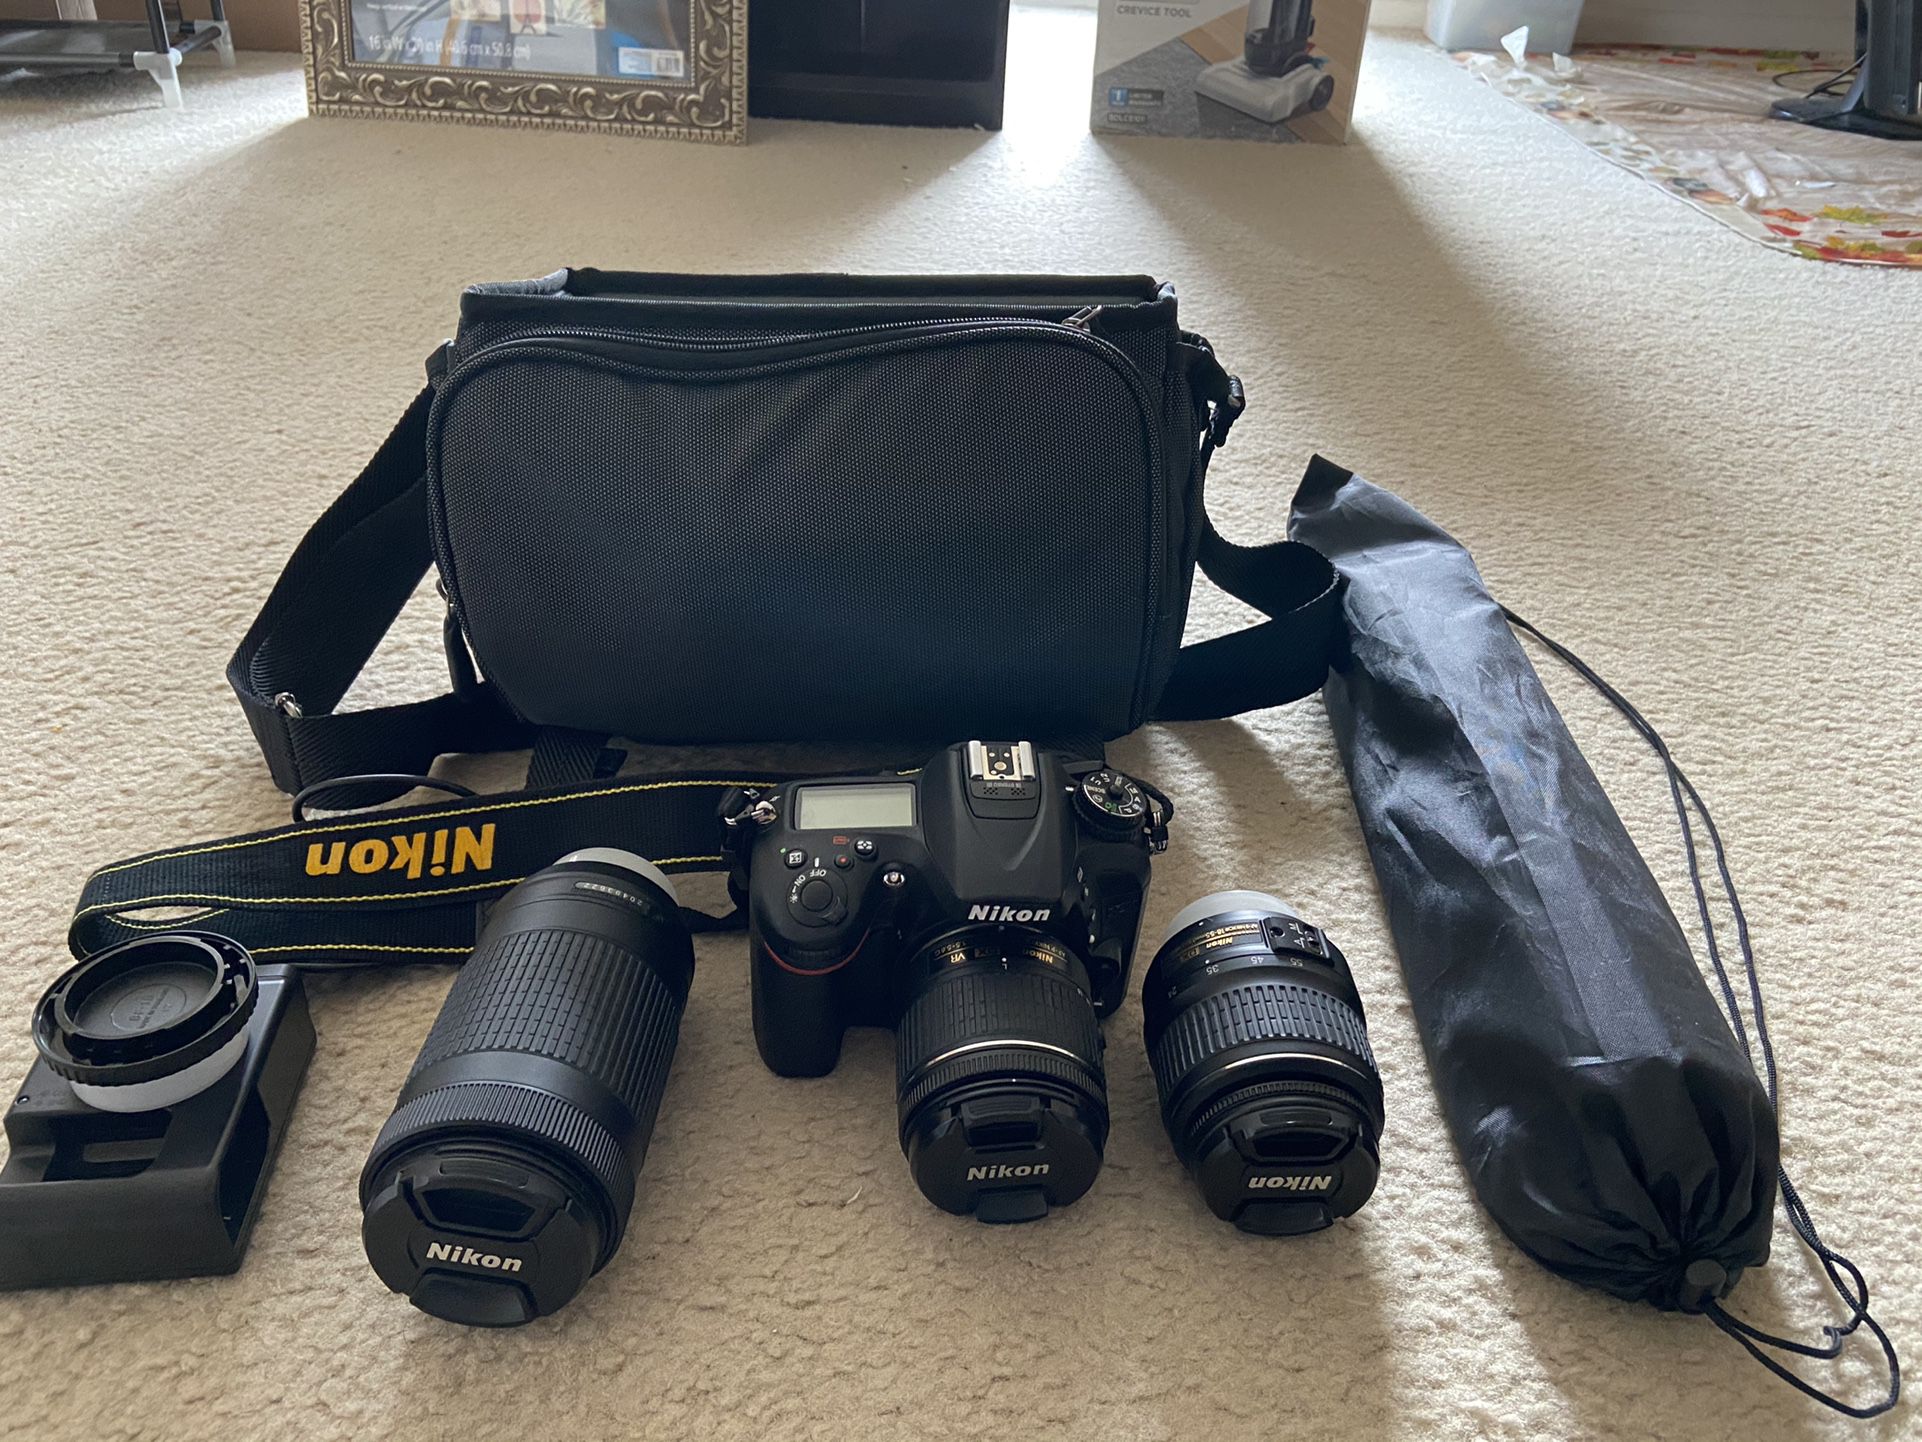 Nikon D7200 with Three Lenses And Accessories - Like New